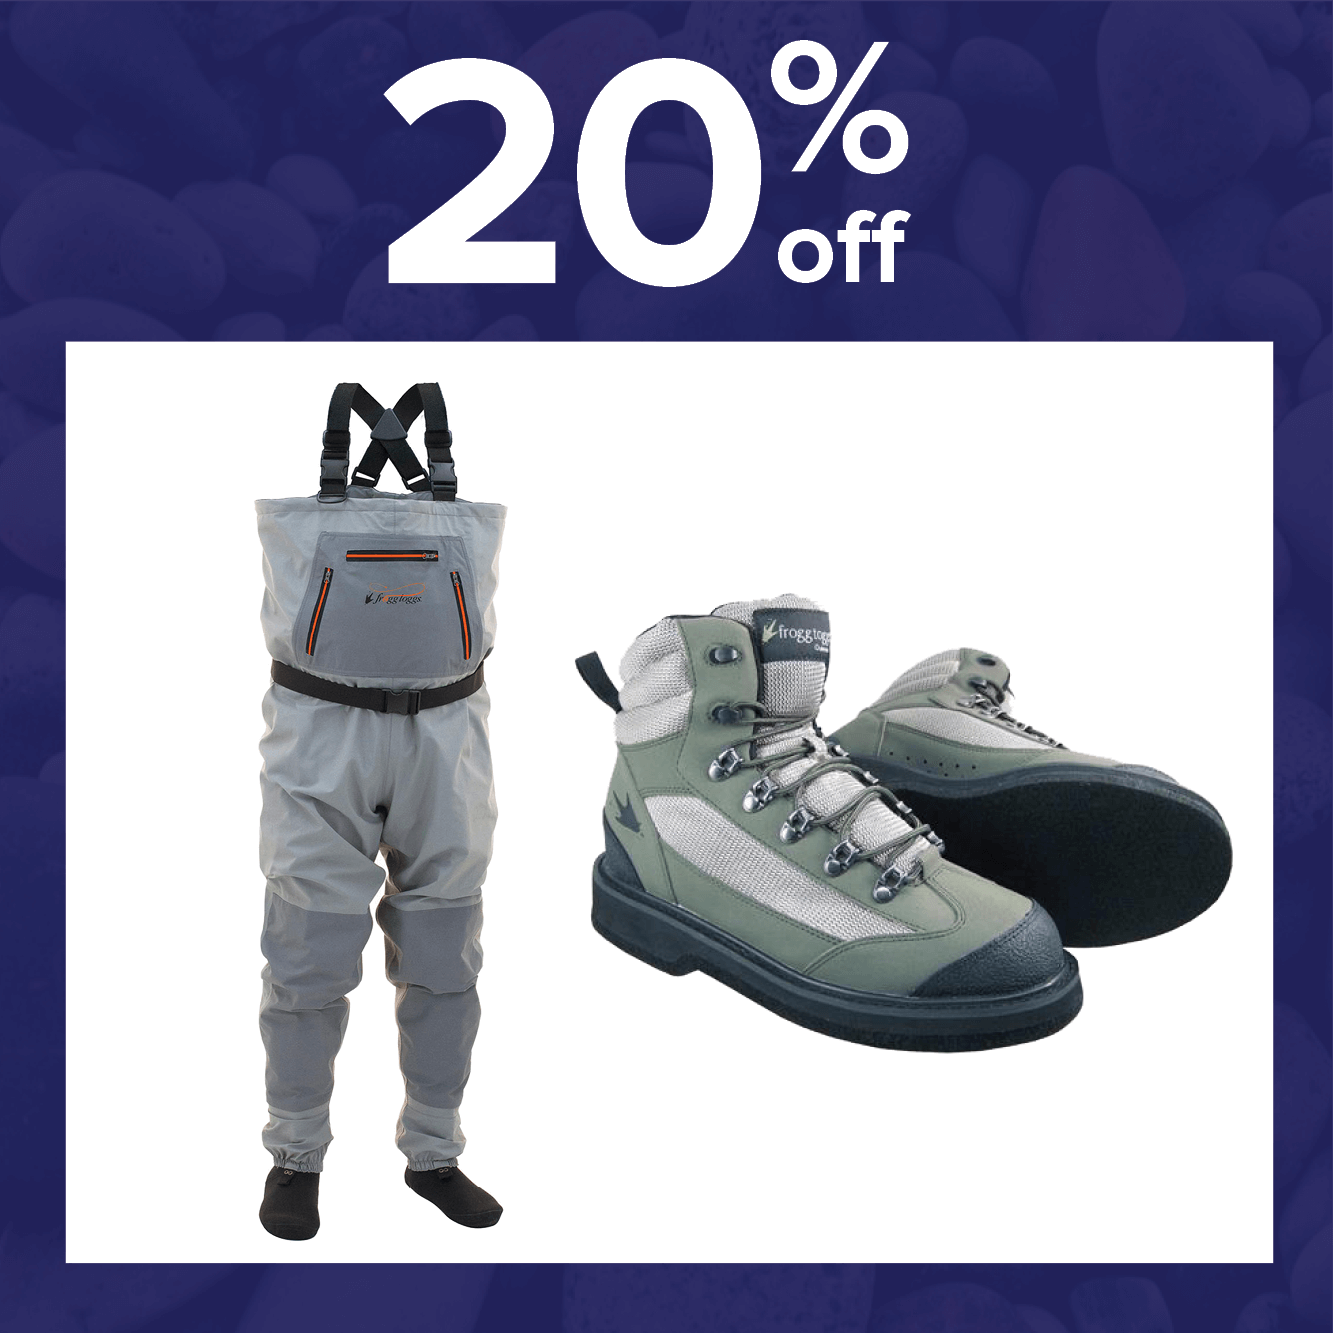 20% off Waders & Boots